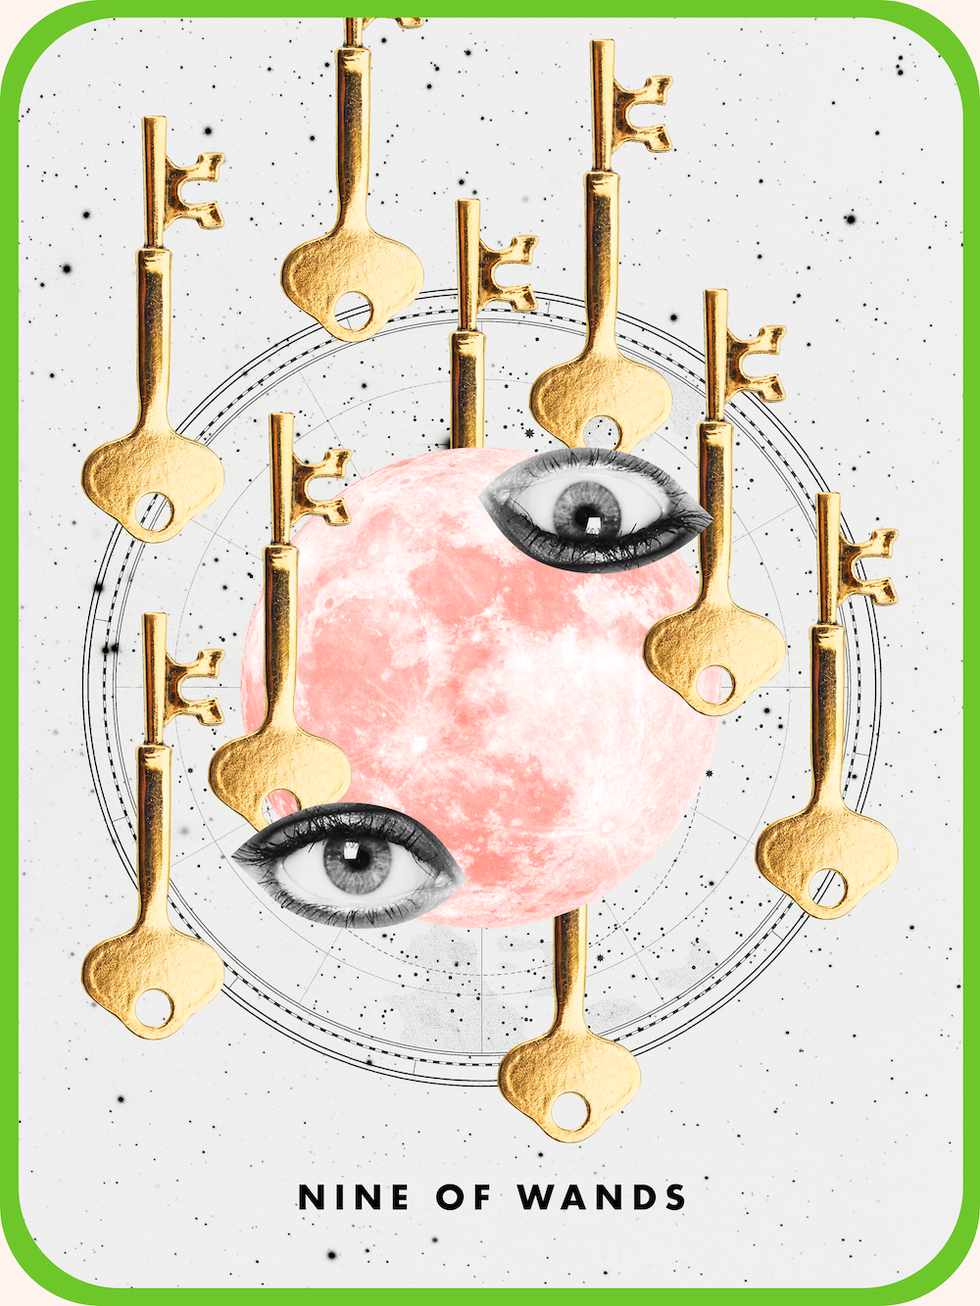 the tarot card the nine of wands, showing nine golden keys surrounding a moon and eyes